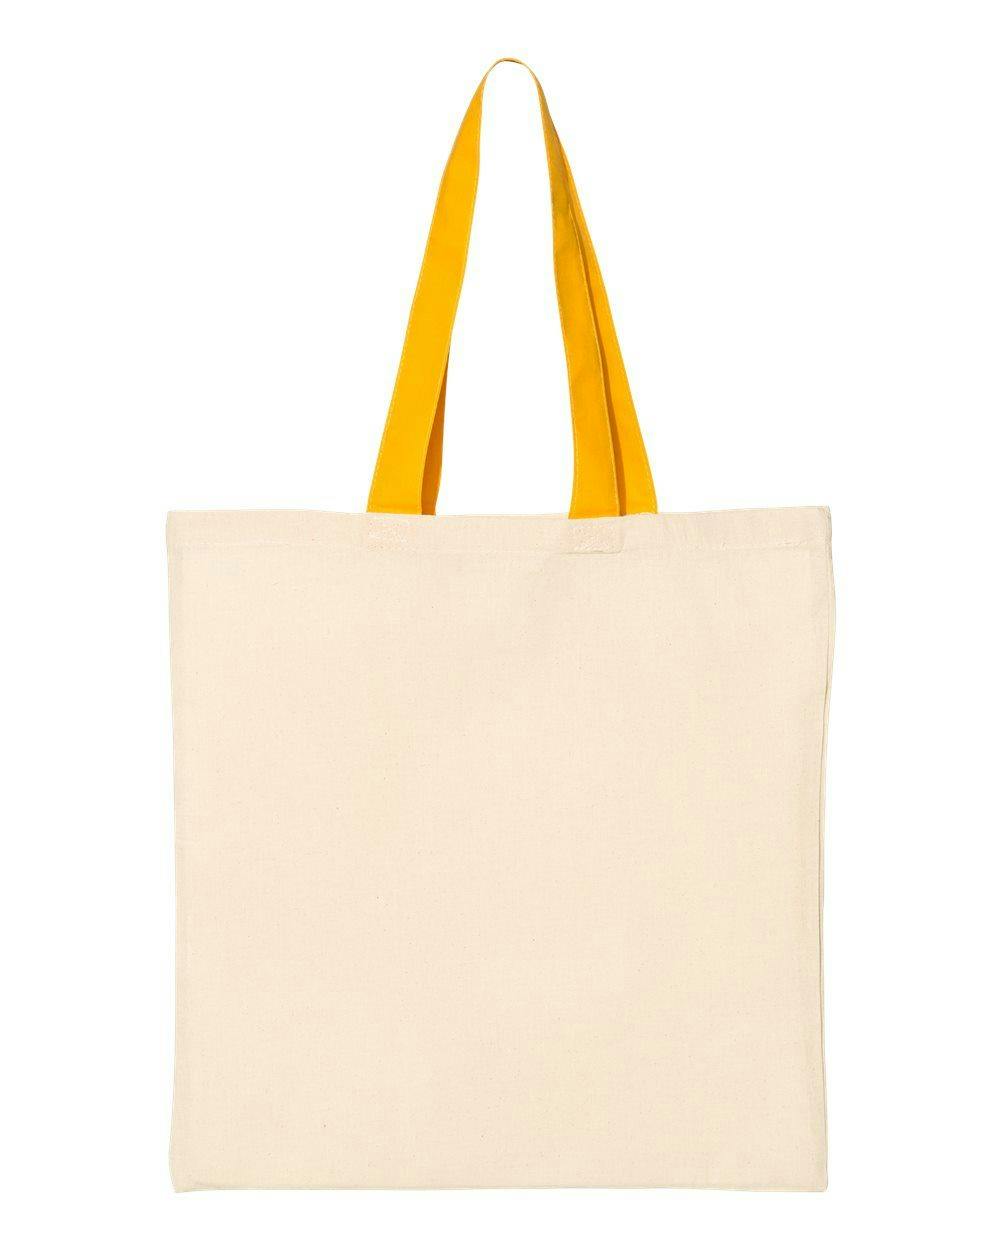 Image for Economical Tote with Contrast-Color Handles - QTB6000